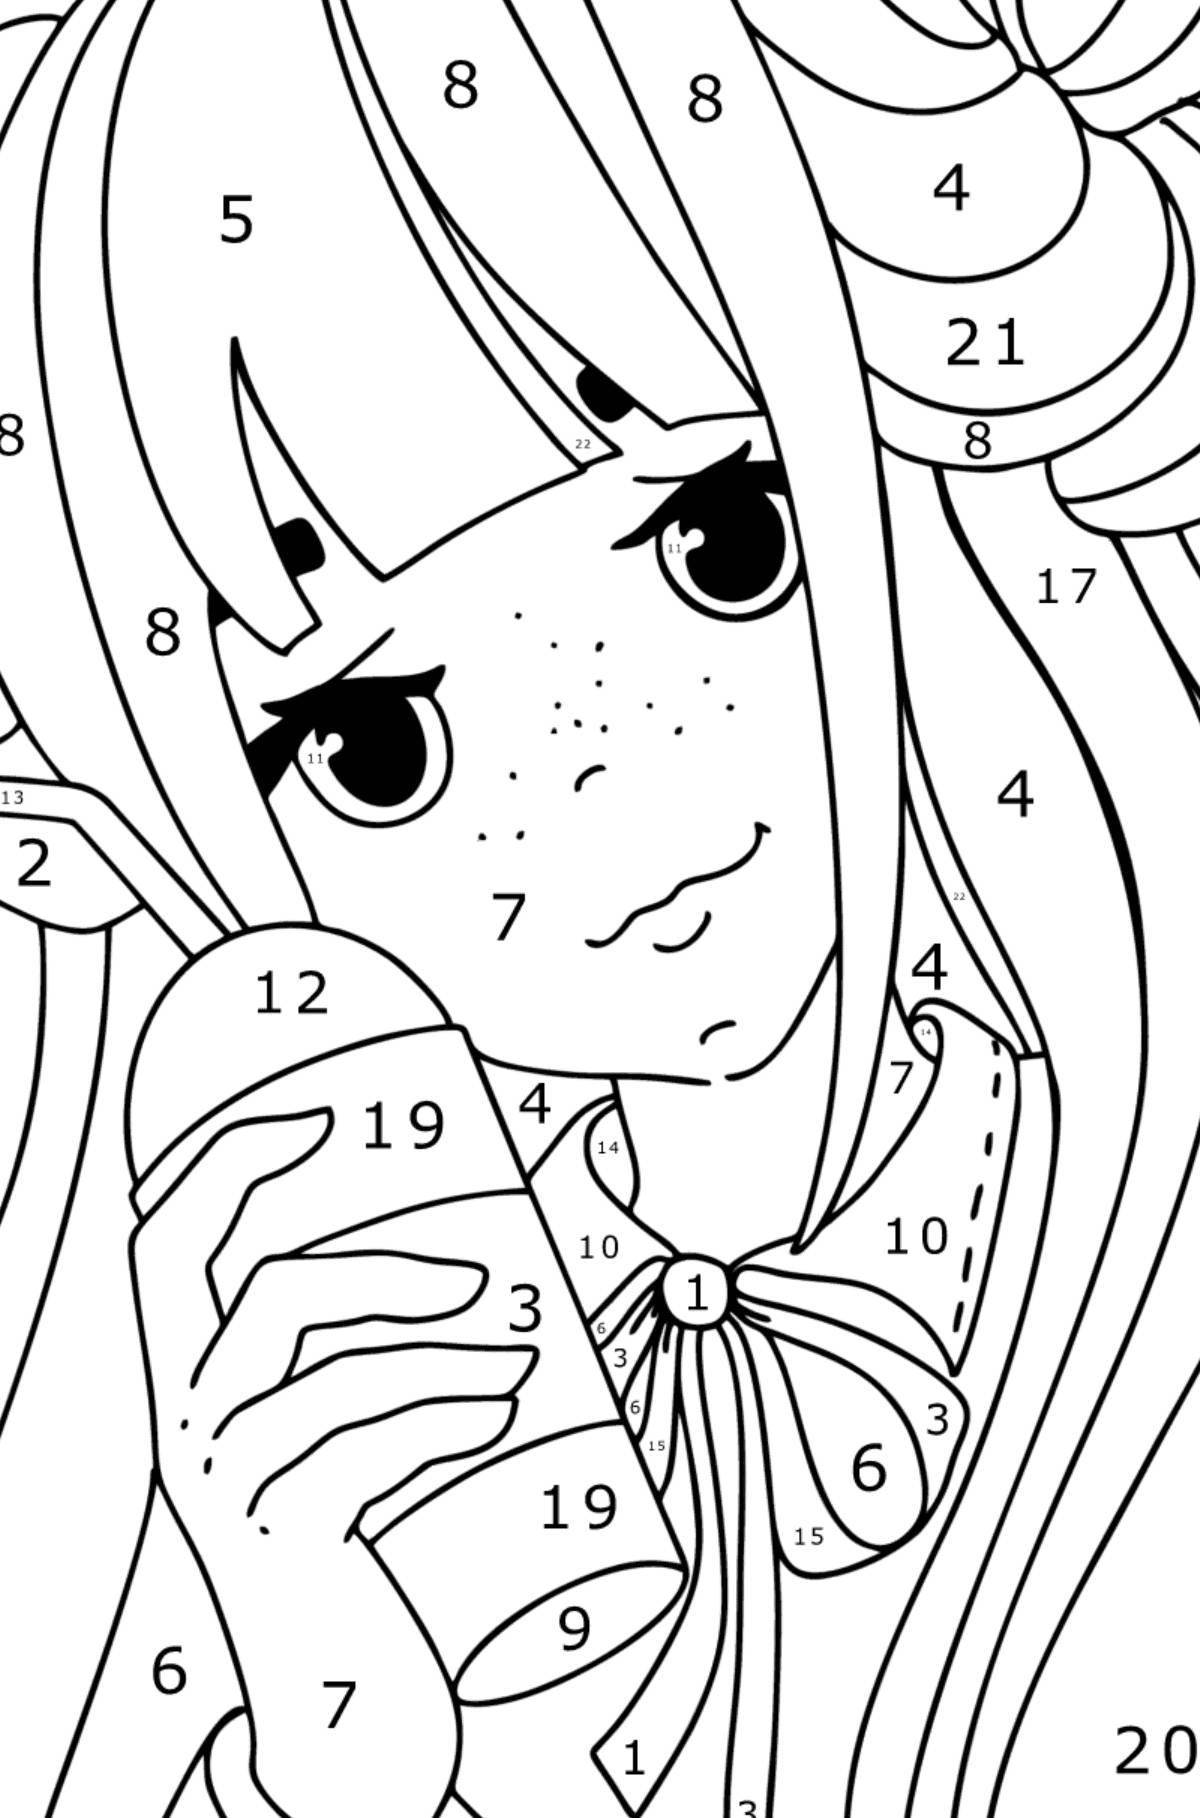 Joyful anime by numbers coloring game